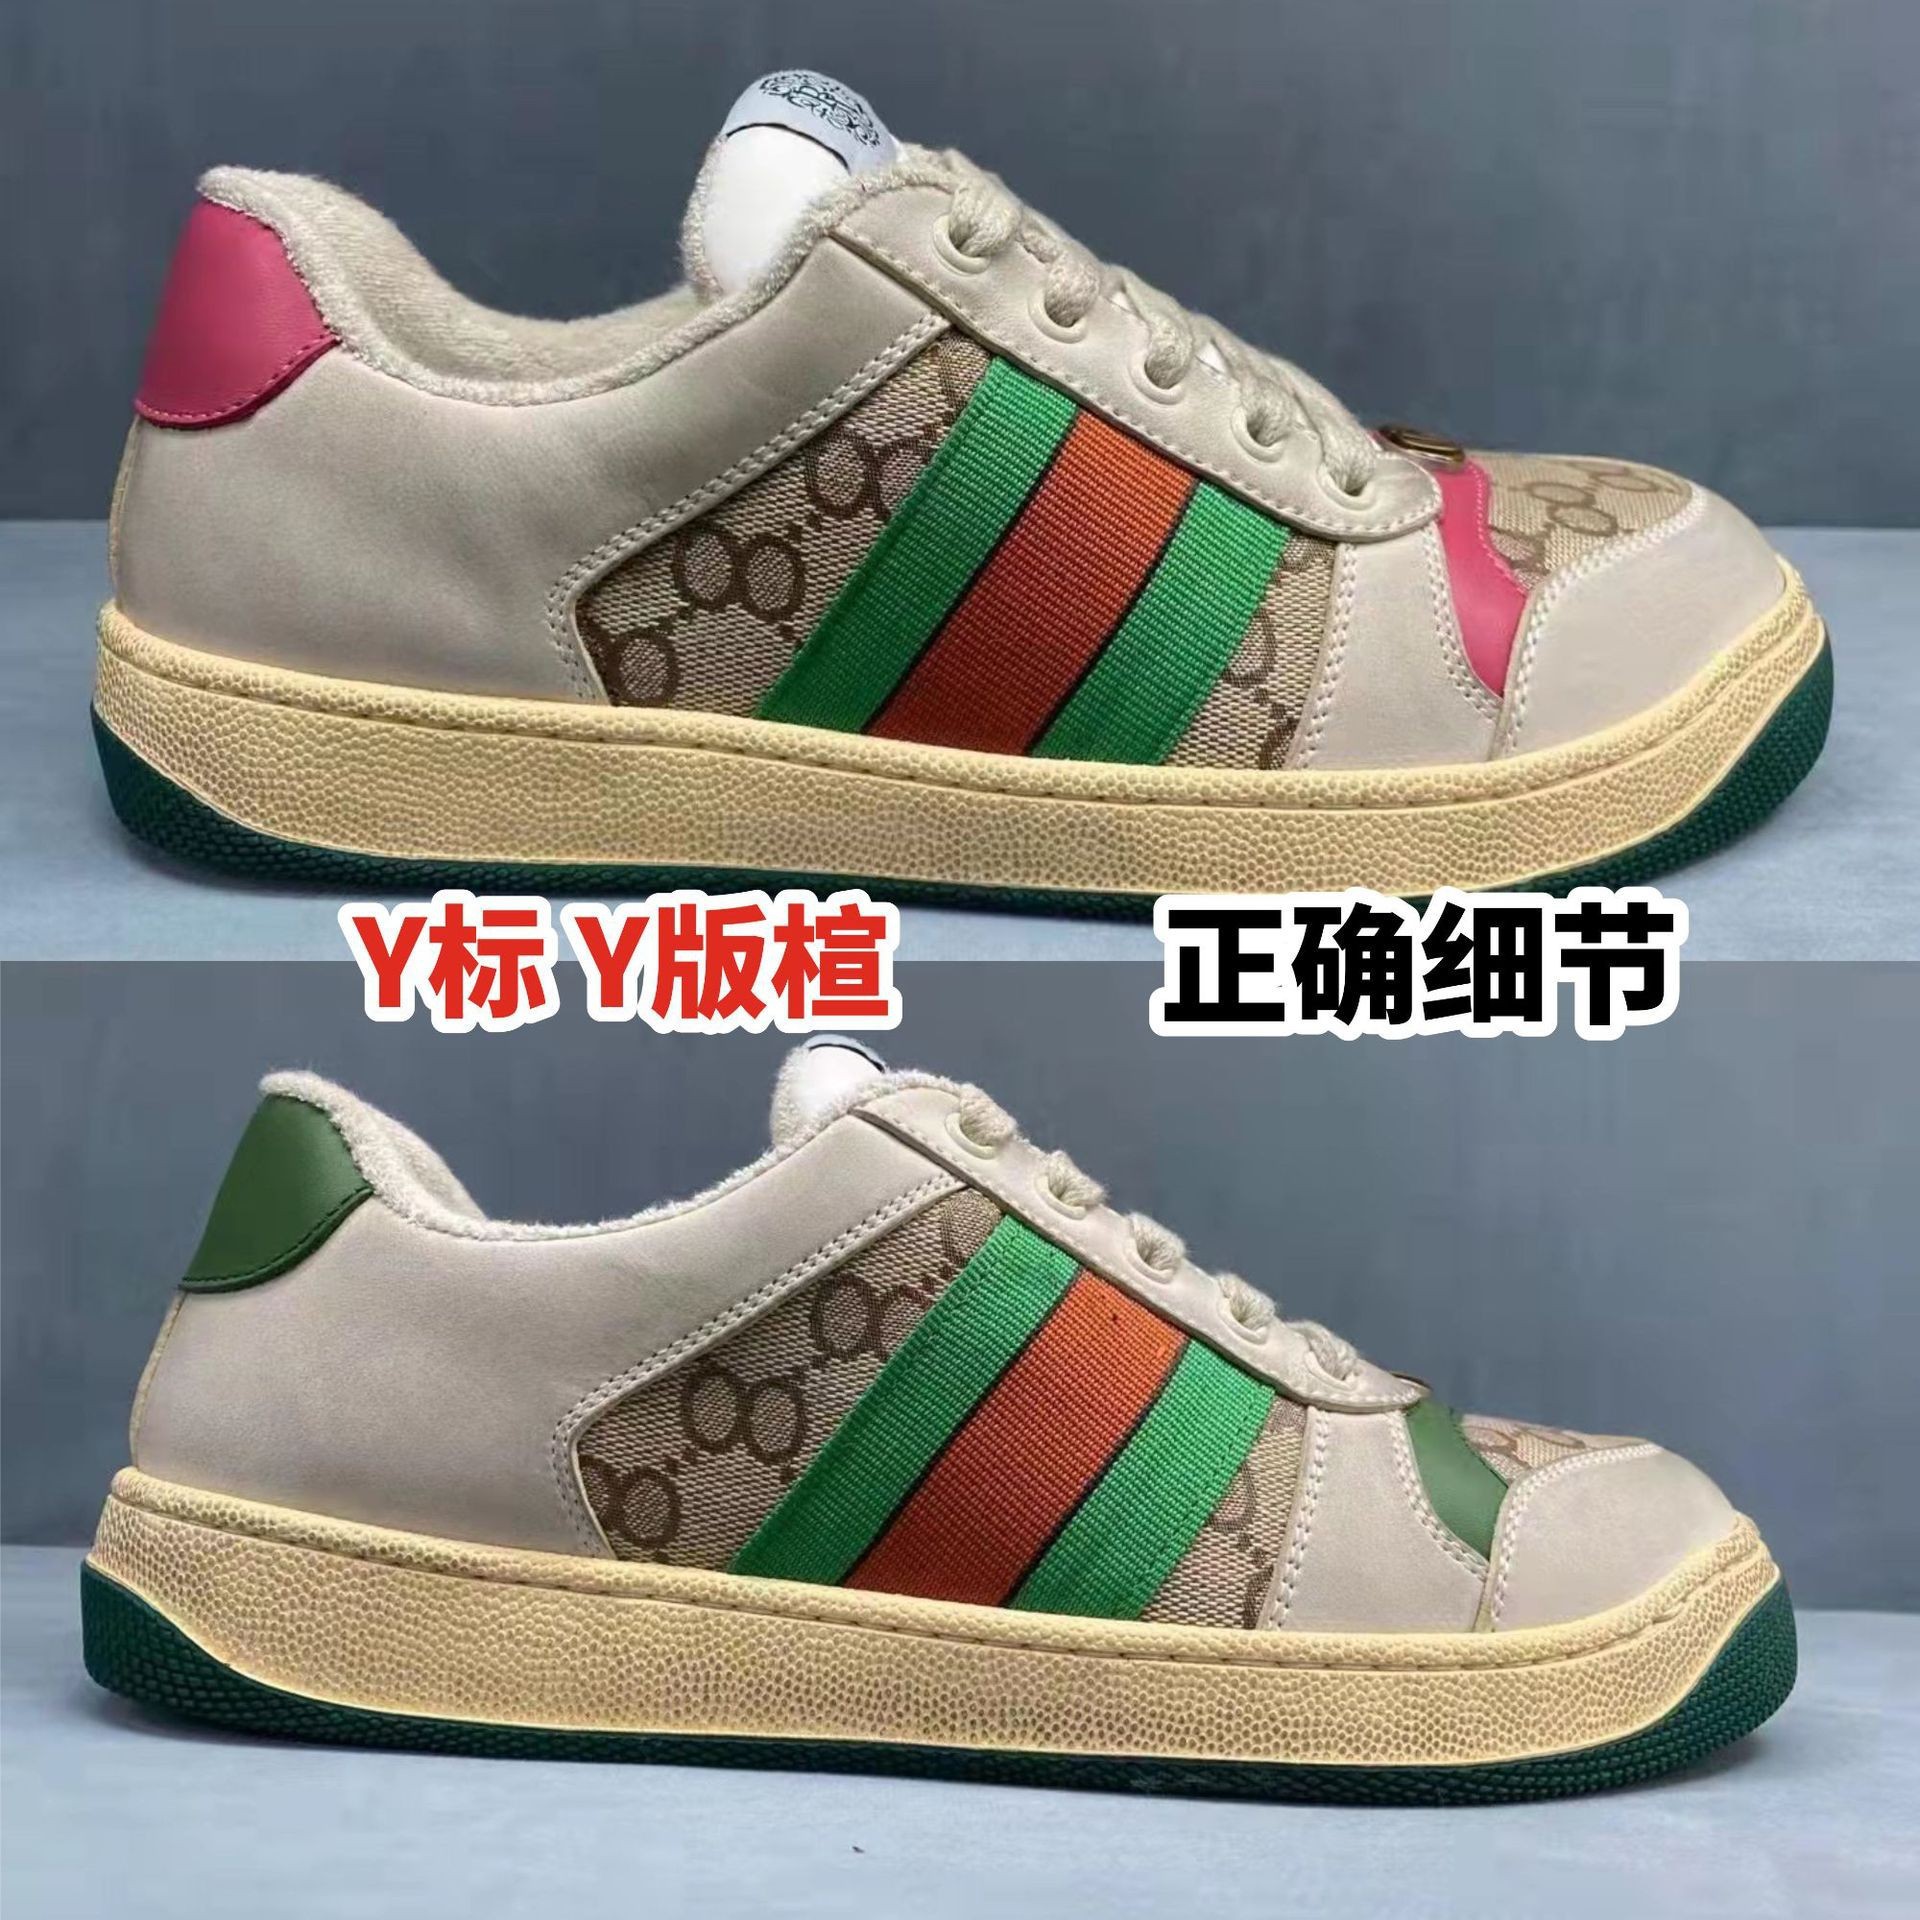 Putian G Home Dirty Shoes Lovers Wild Women's Genuine Leather Shoes Golden Goose Shoes Sports Men's Shoes Presbyopic Green Lovers Shoes Board Shoes